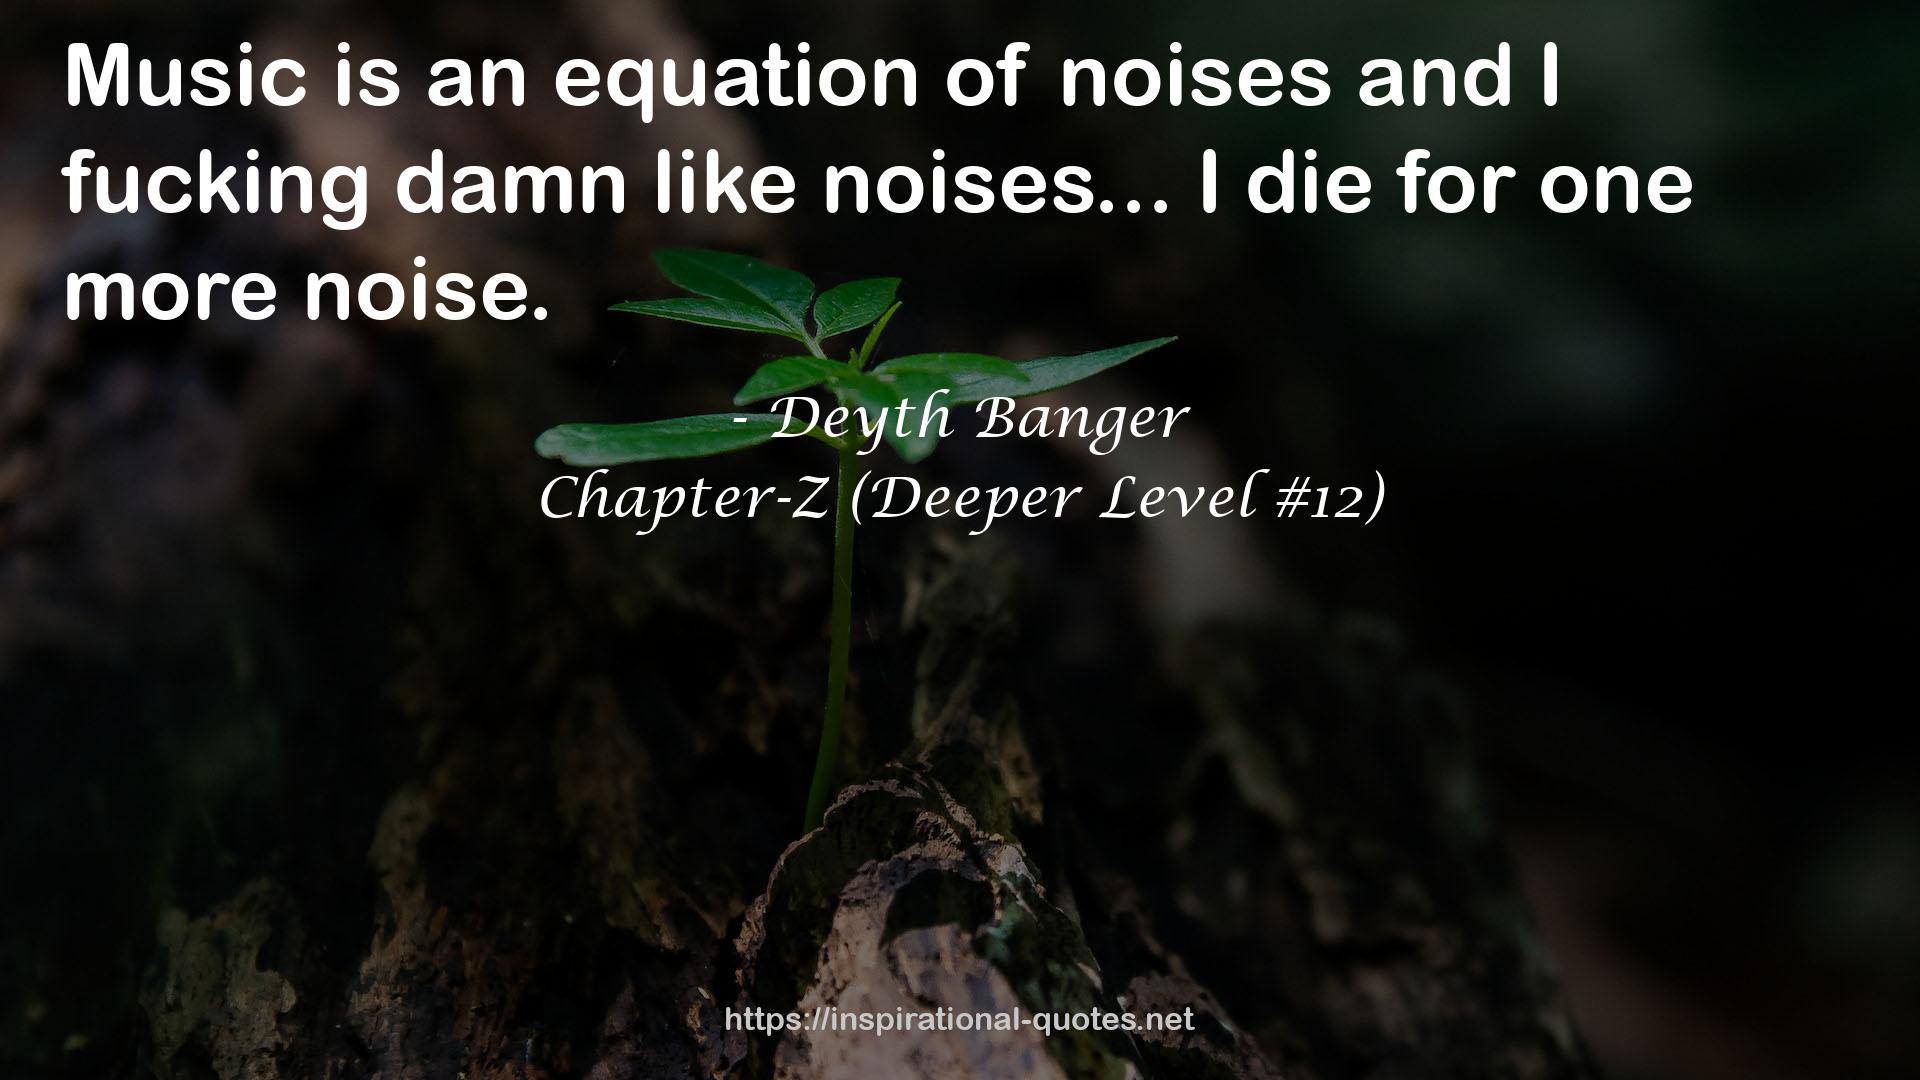 Chapter-Z (Deeper Level #12) QUOTES